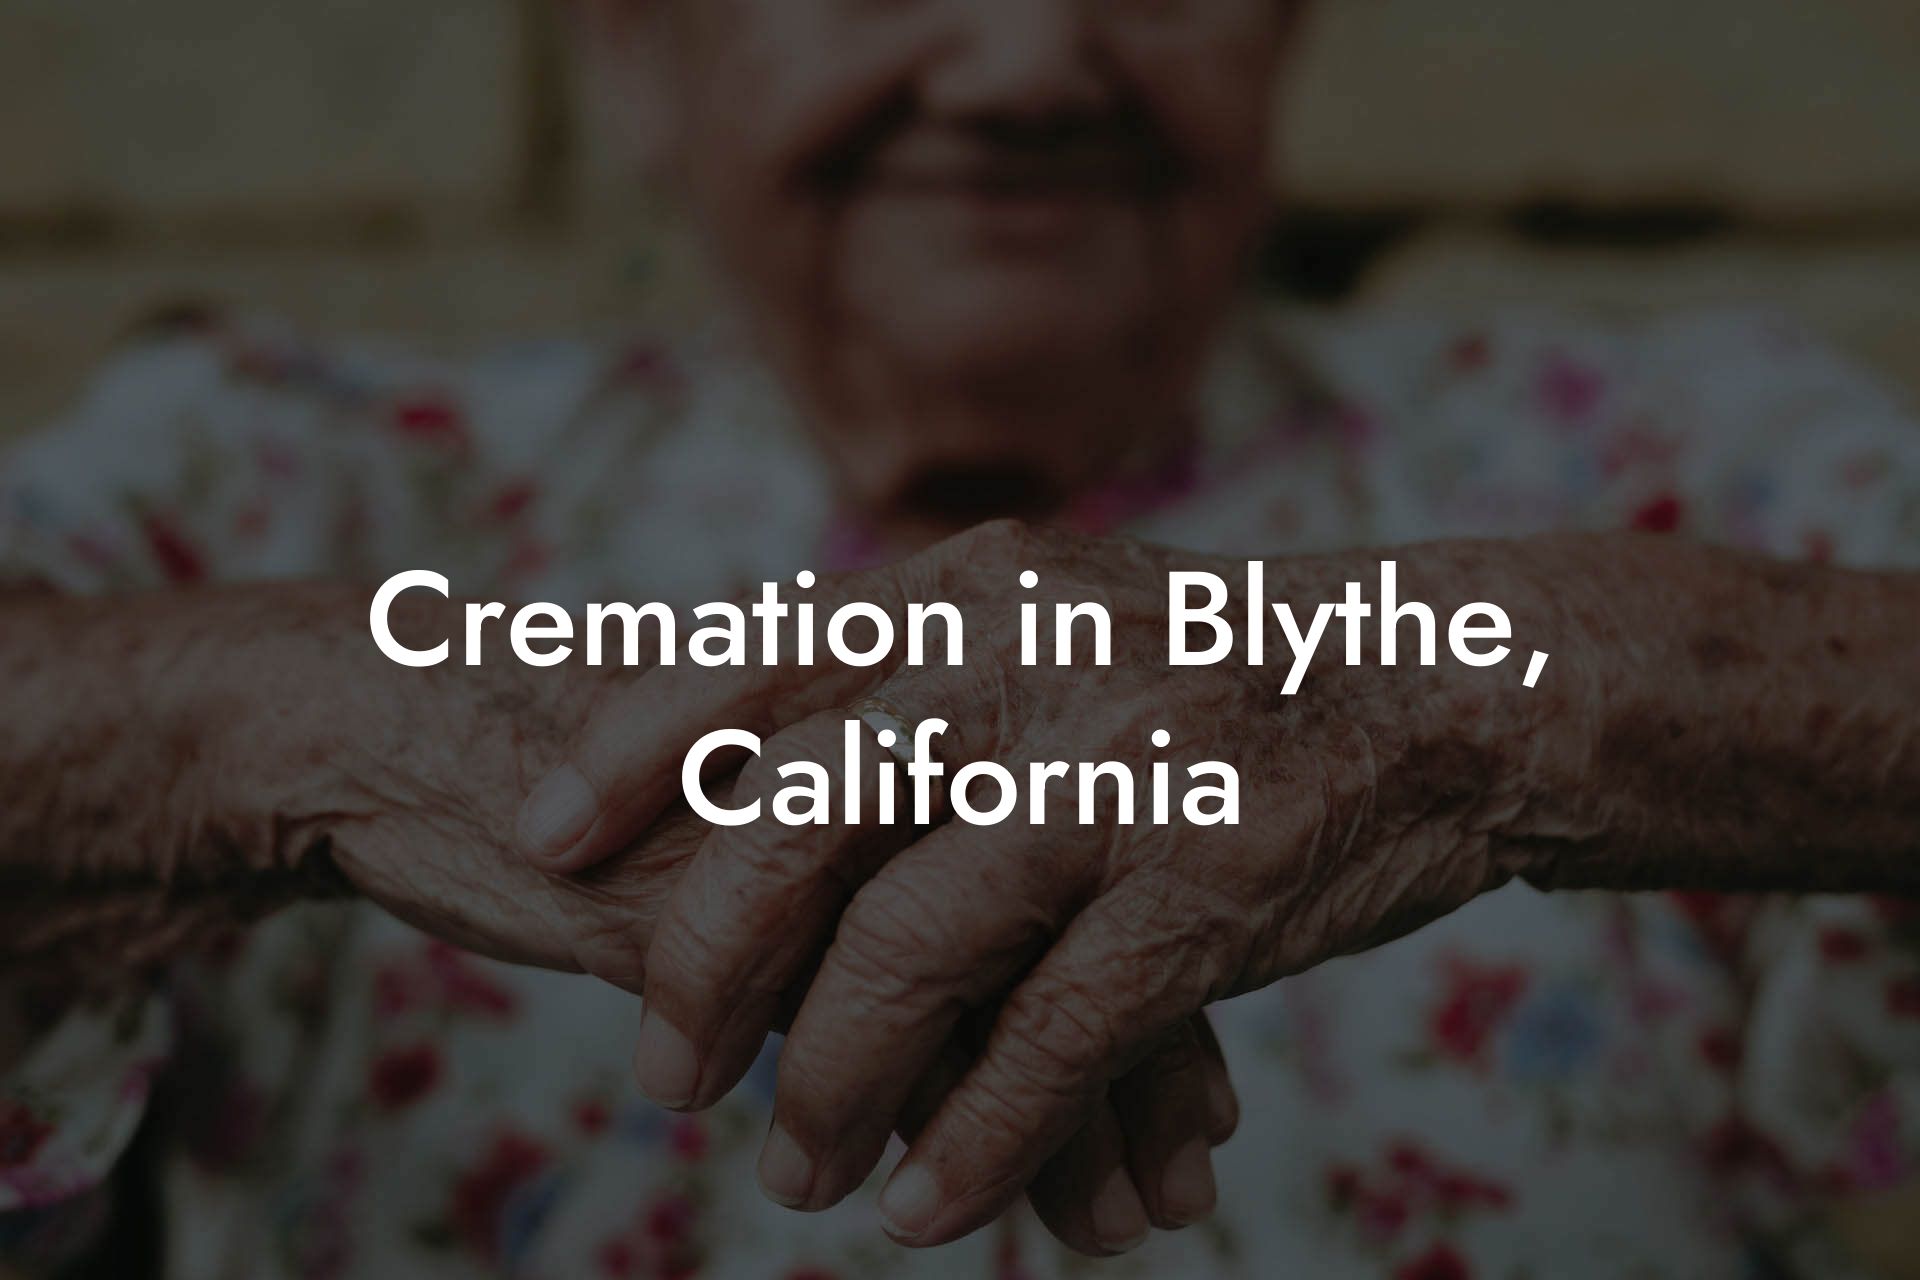 Cremation in Blythe, California